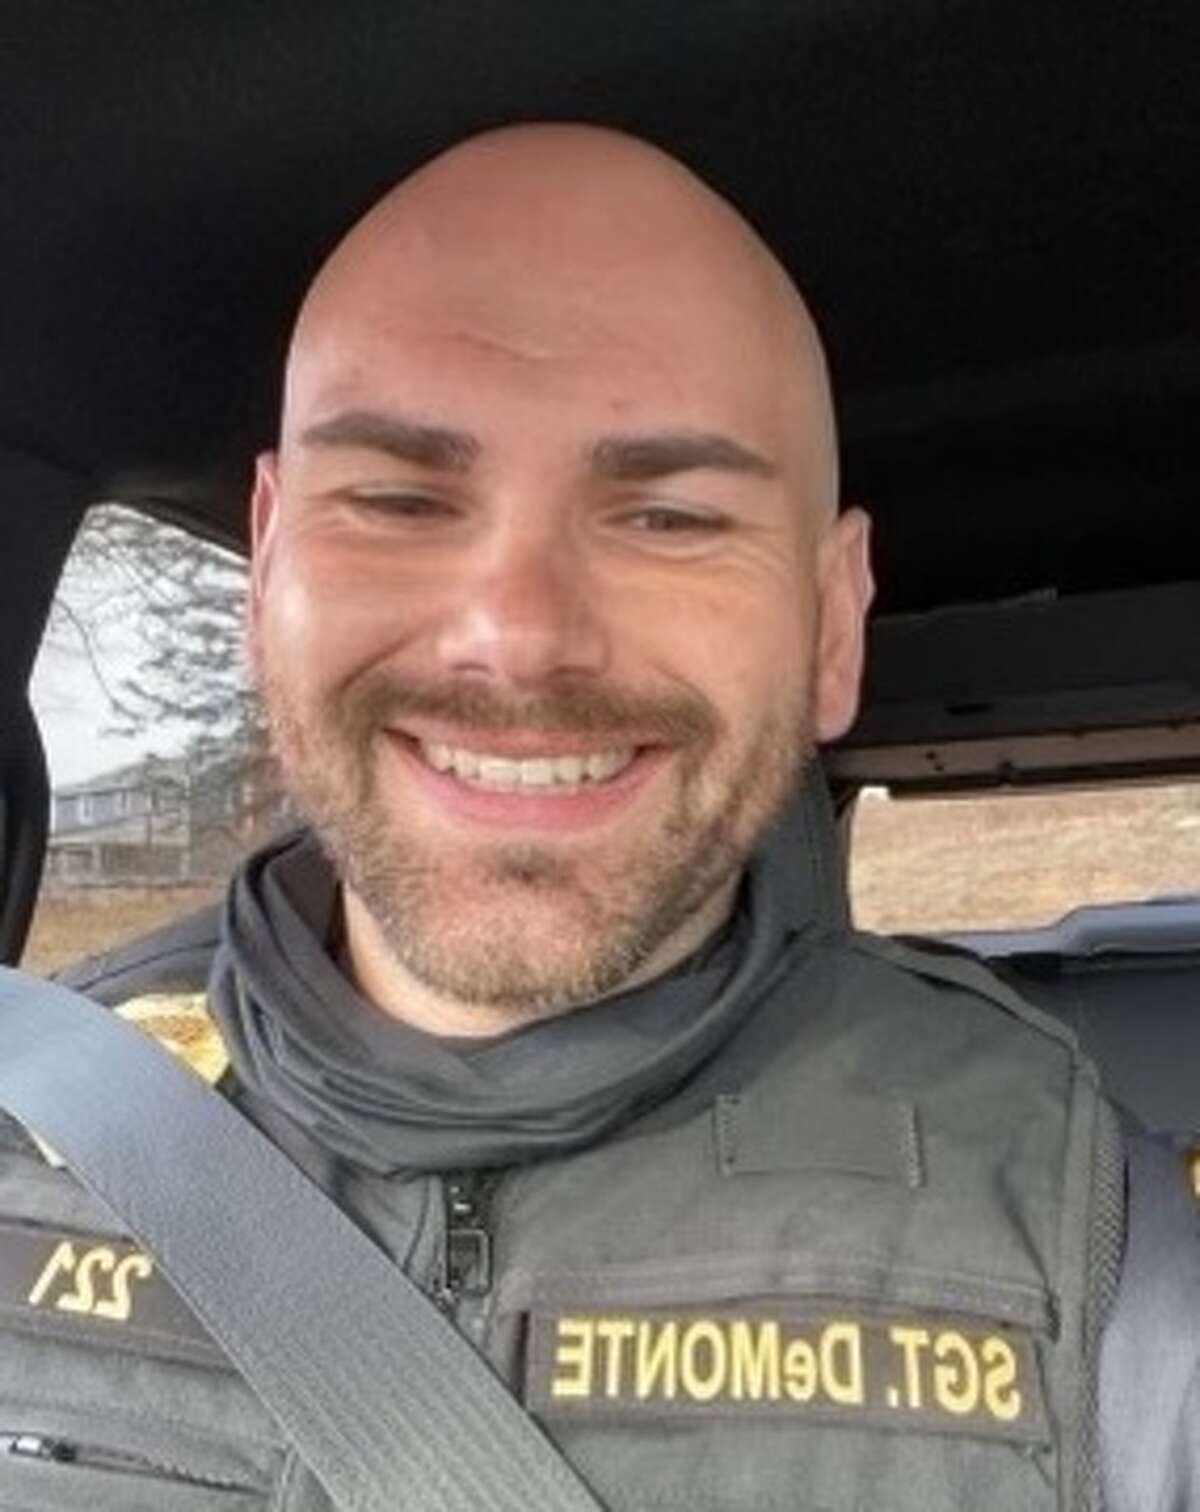 Bristol police Lt. Dustin DeMonte was killed in October while responding to a domestic dispute on Redstone Hill Road. He was promoted posthumously from sergeant to lieutenant.